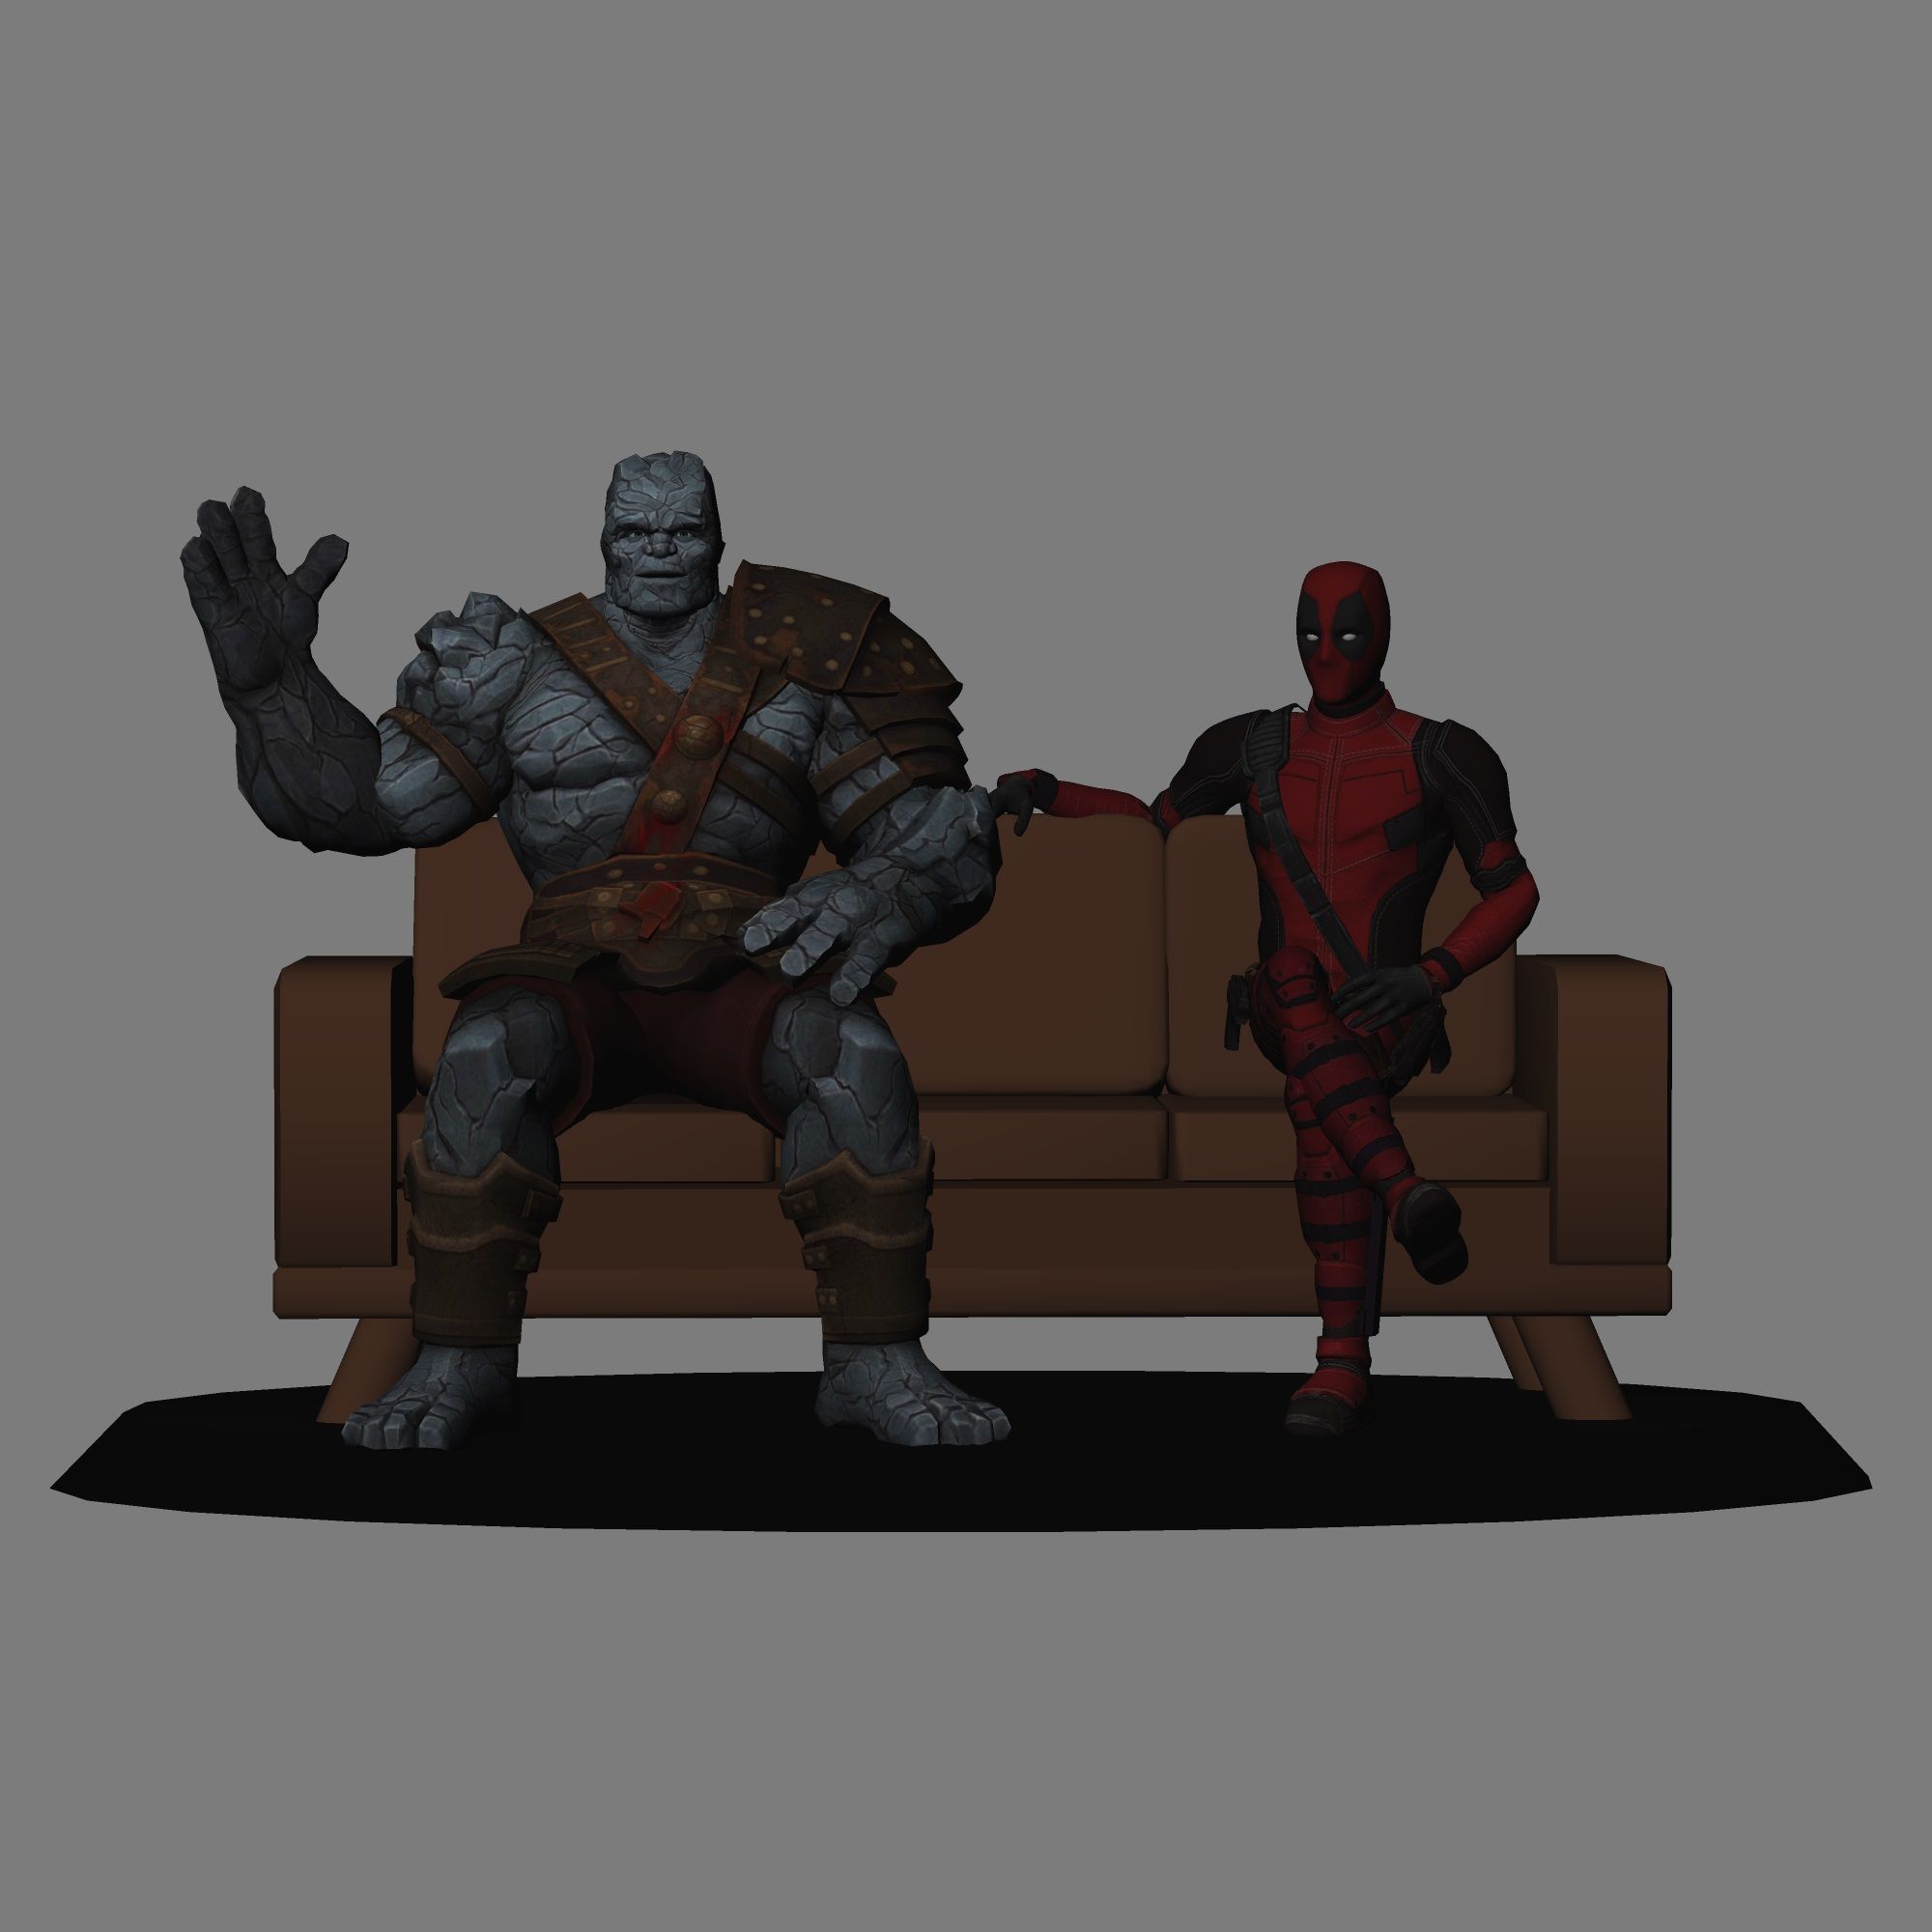 01.jpg Download STL file Deadpool and Korg CROSSOVER in the sofa - low poly 3d print • 3D printing template, TonMcu